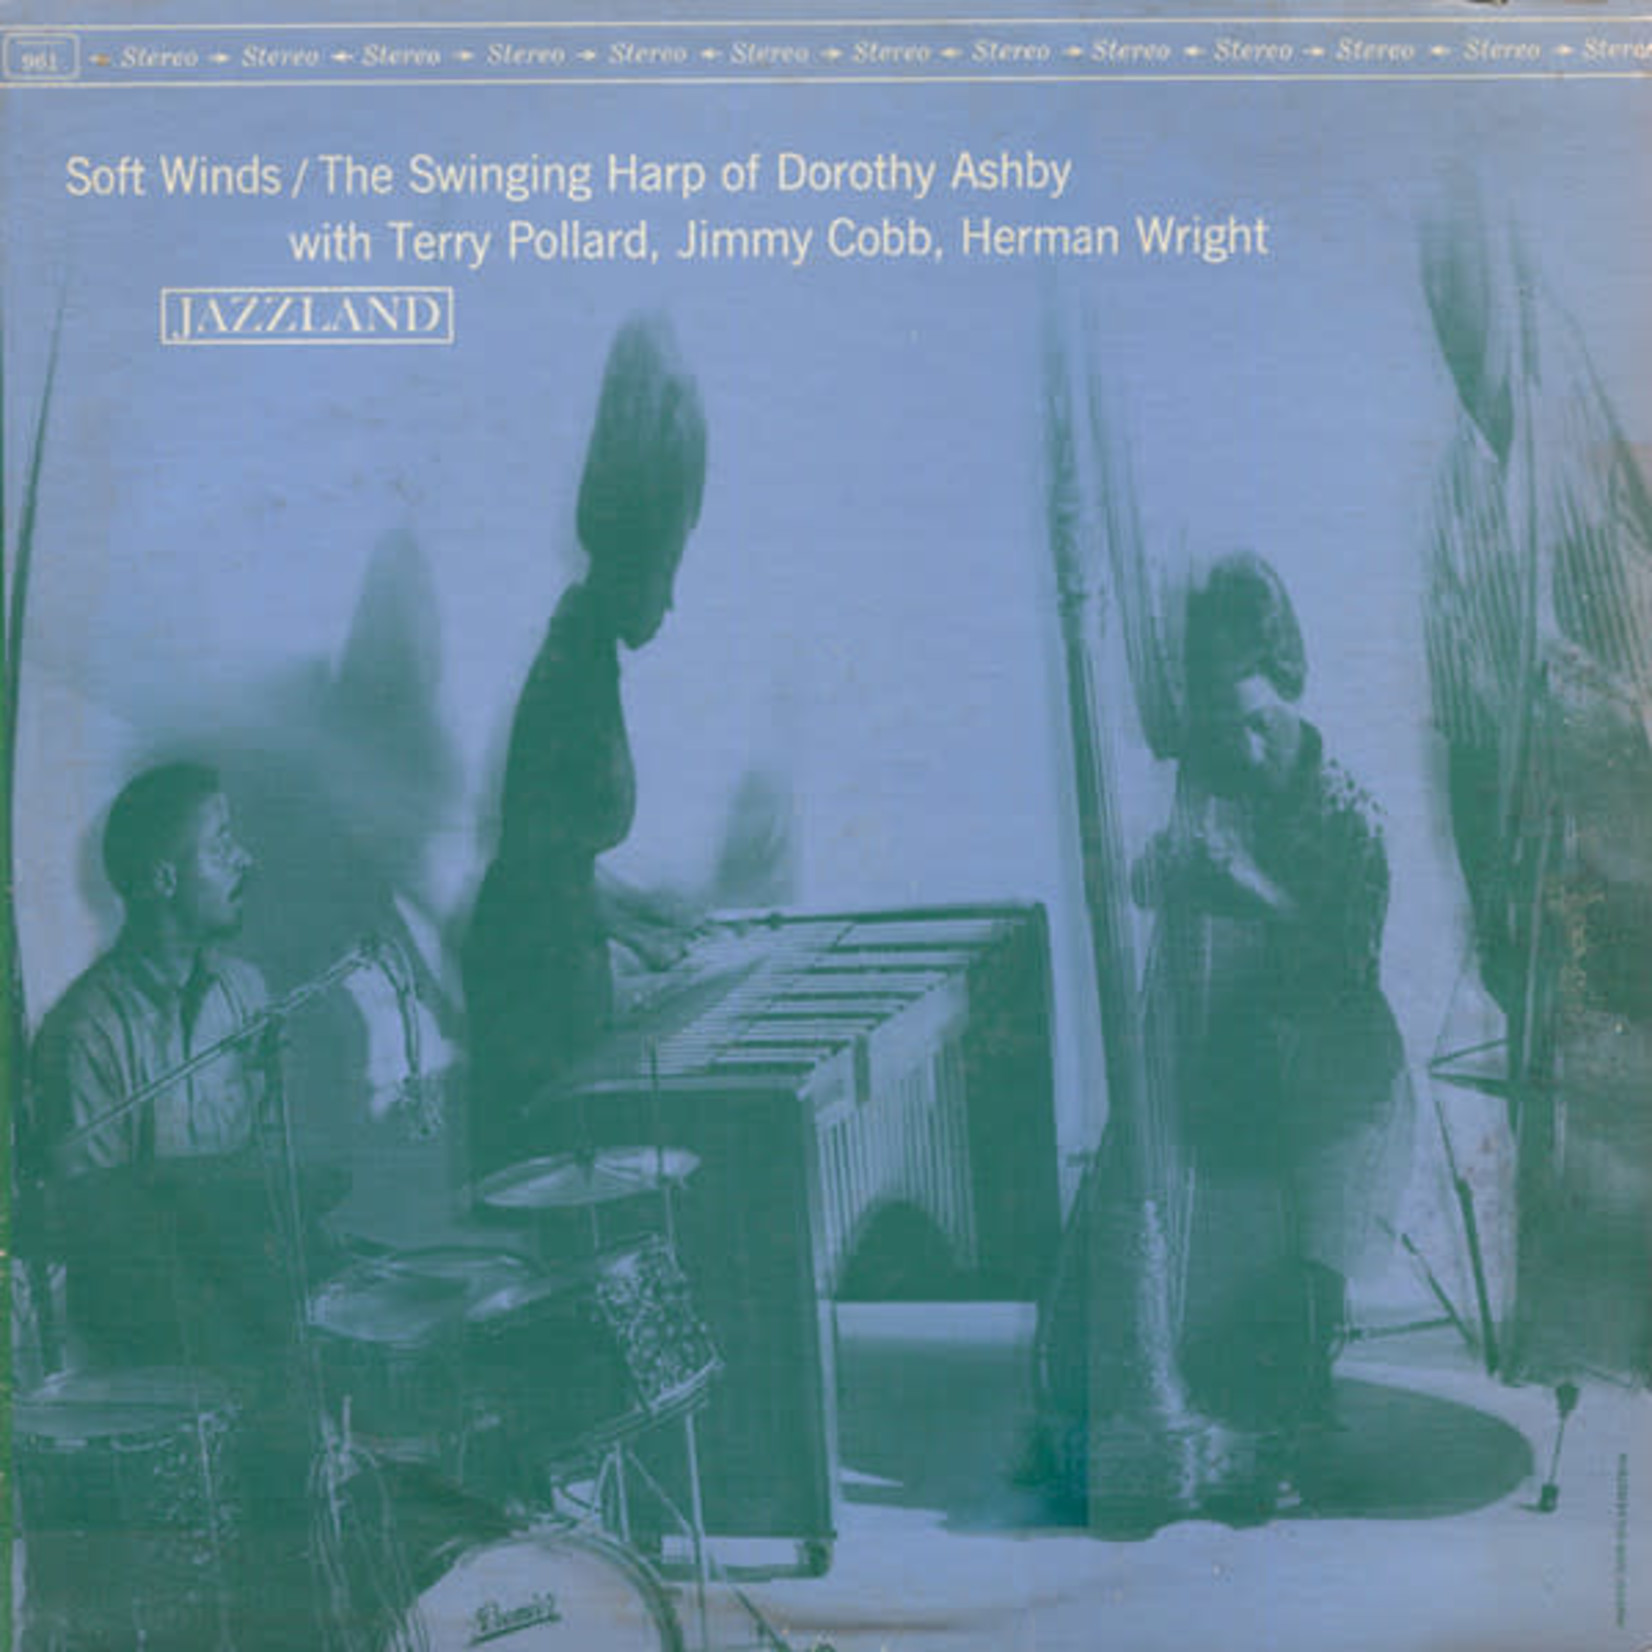 [New] Dorothy Ashby - Soft Winds: The Swinging Harp of Dorothy Ashby (clear vinyl)